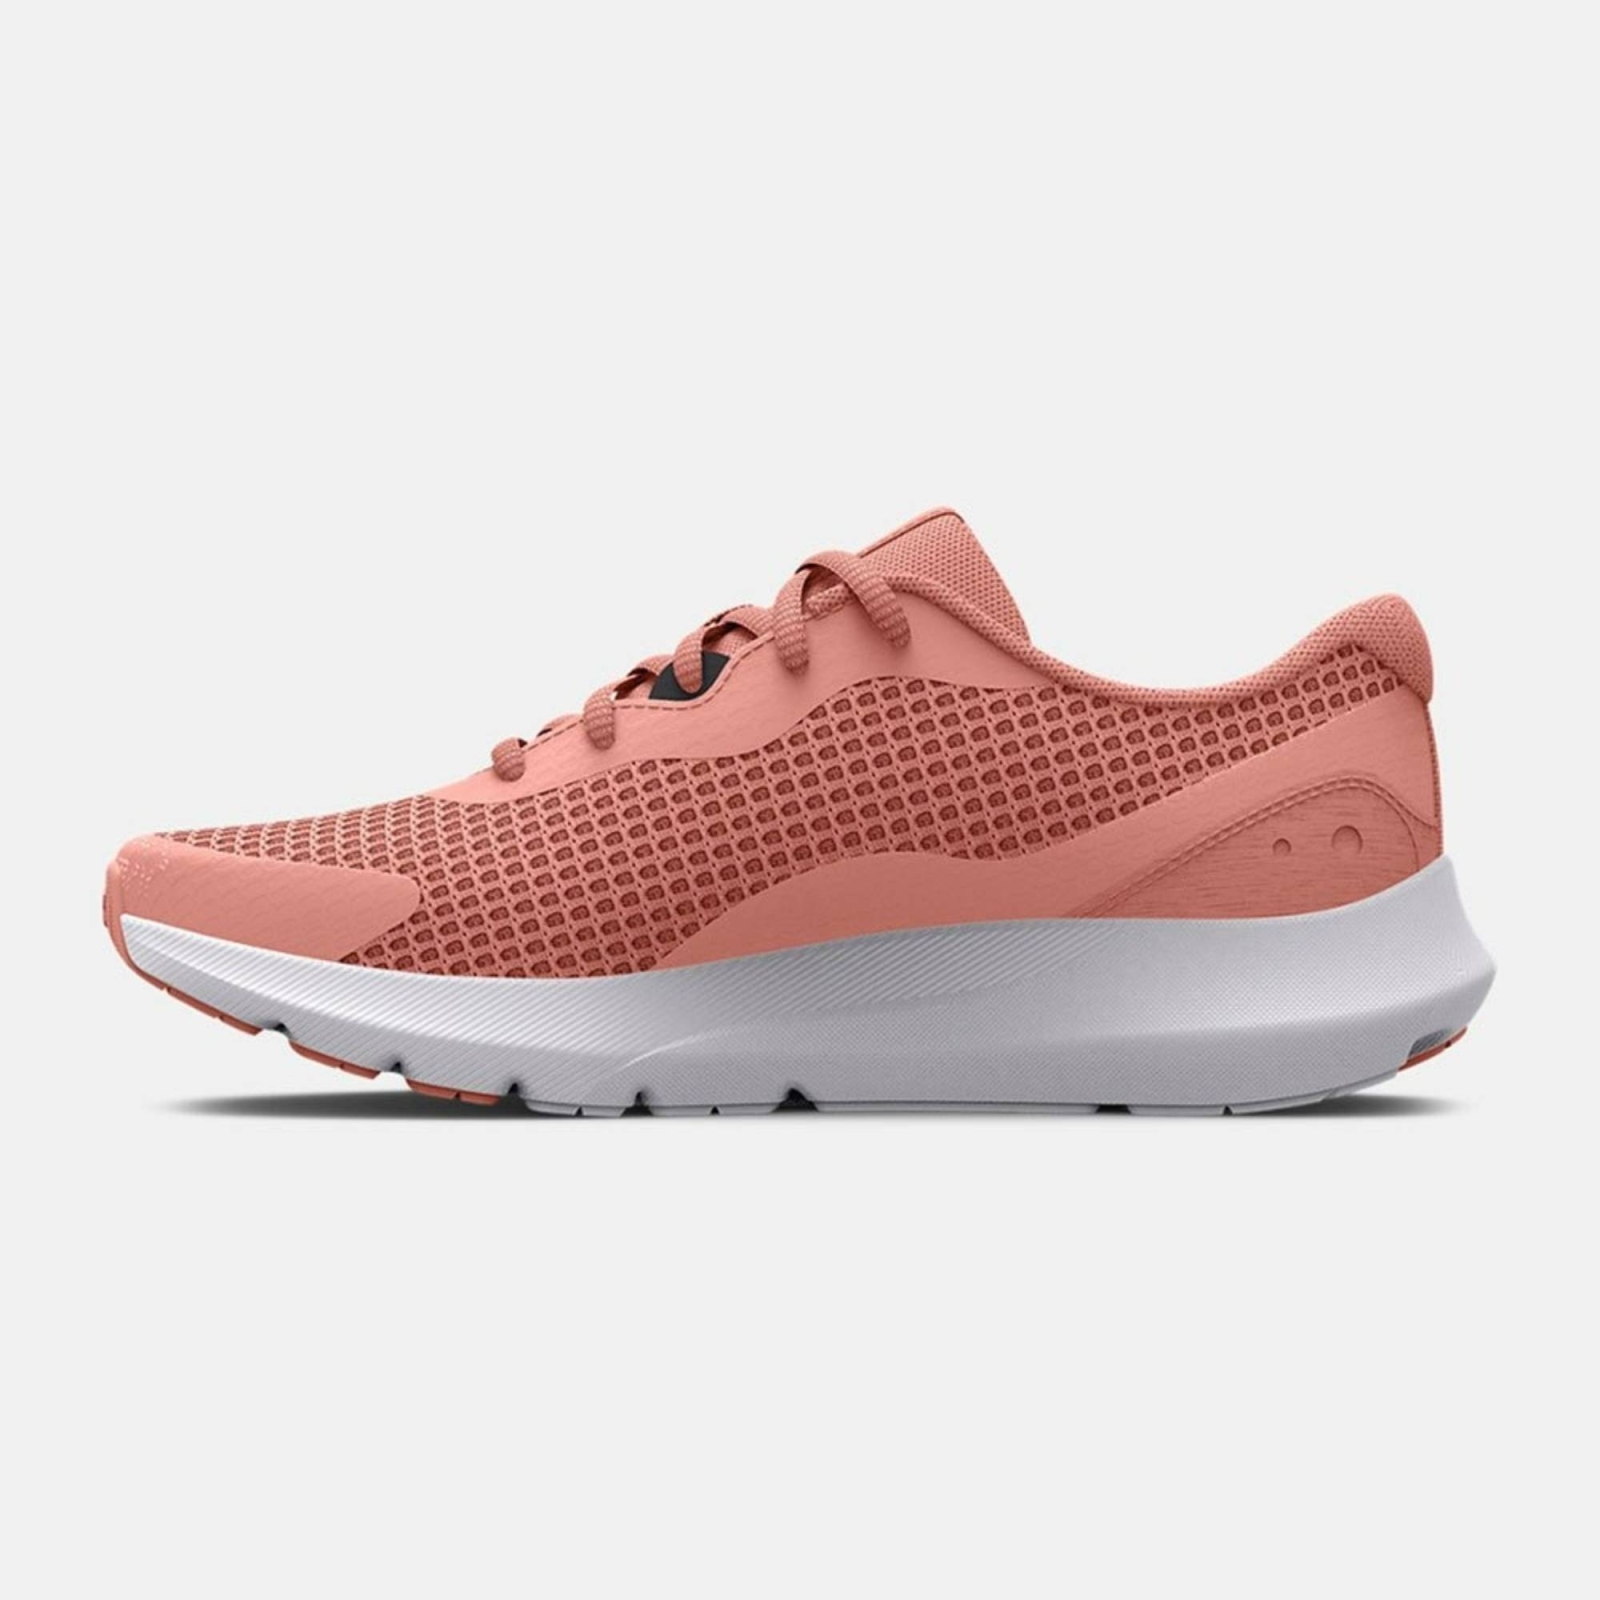 UNDER ARMOUR WOMENS SURGE 3